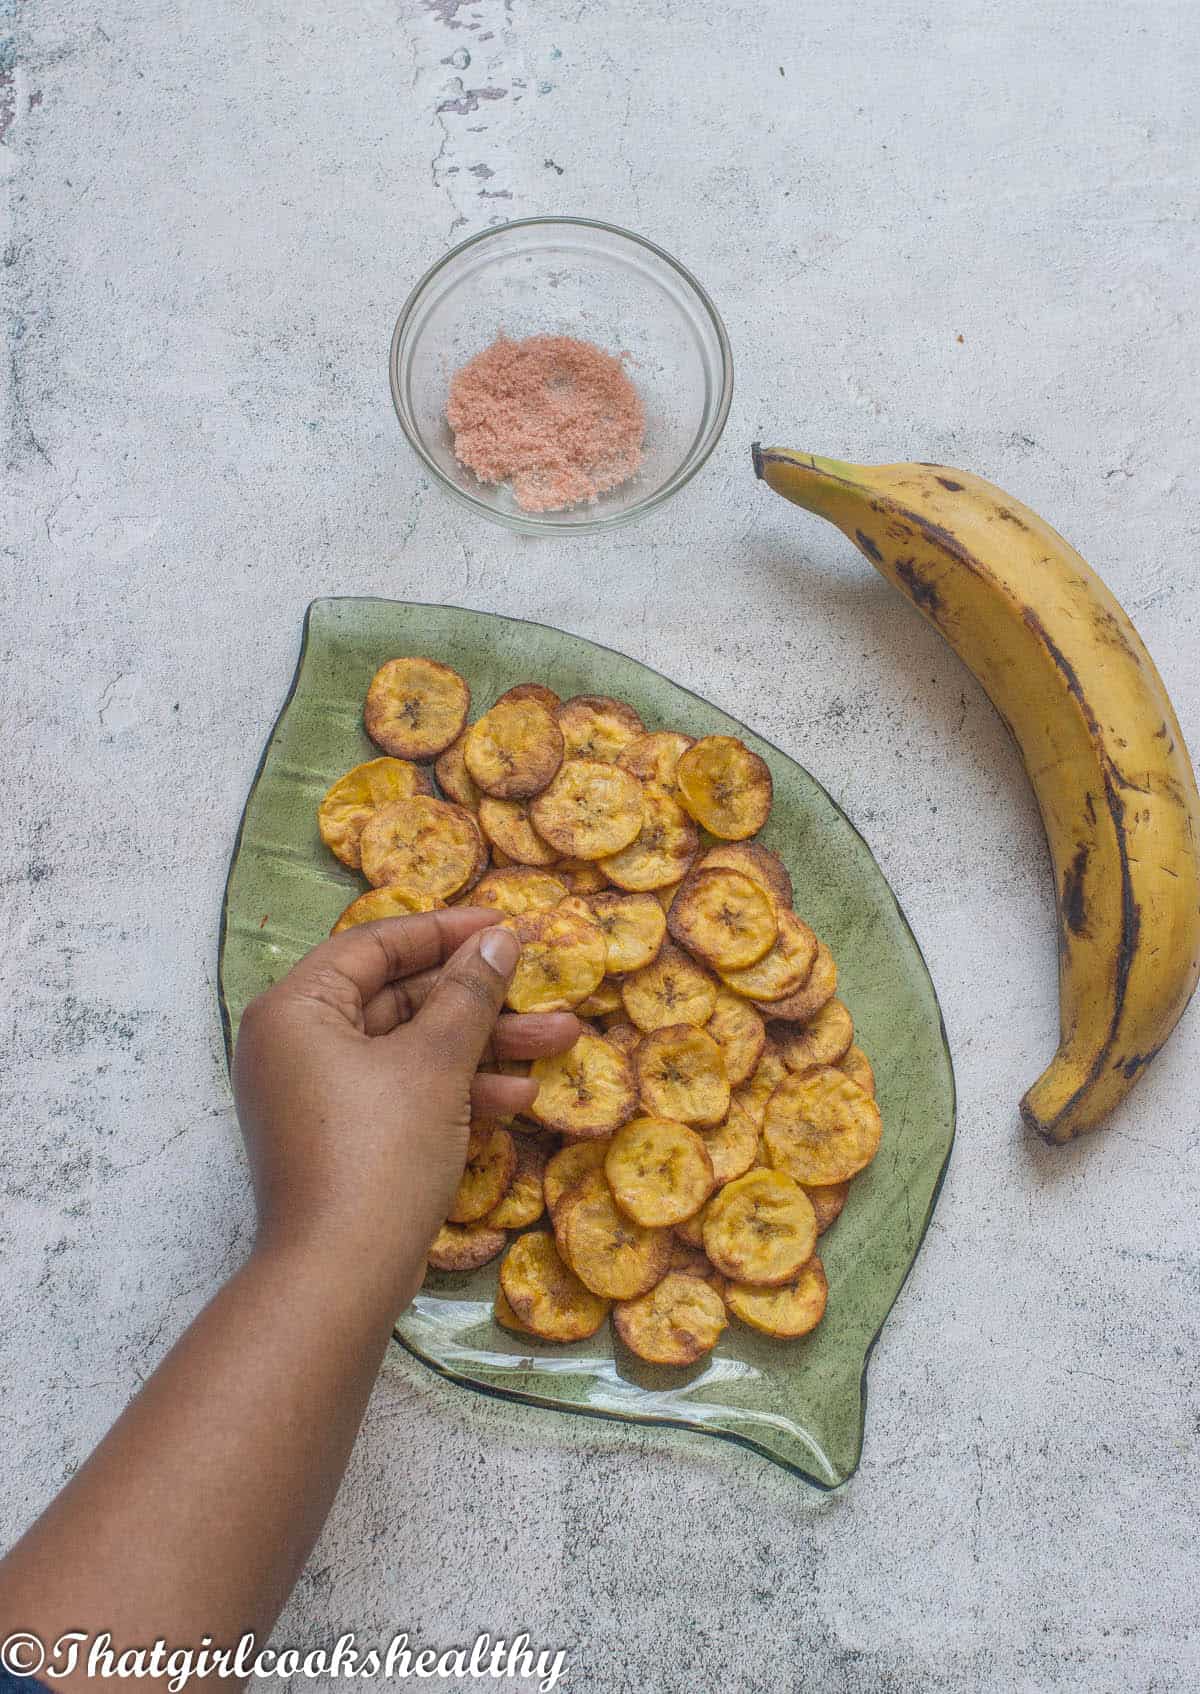 Arm grabbing some plantain chips